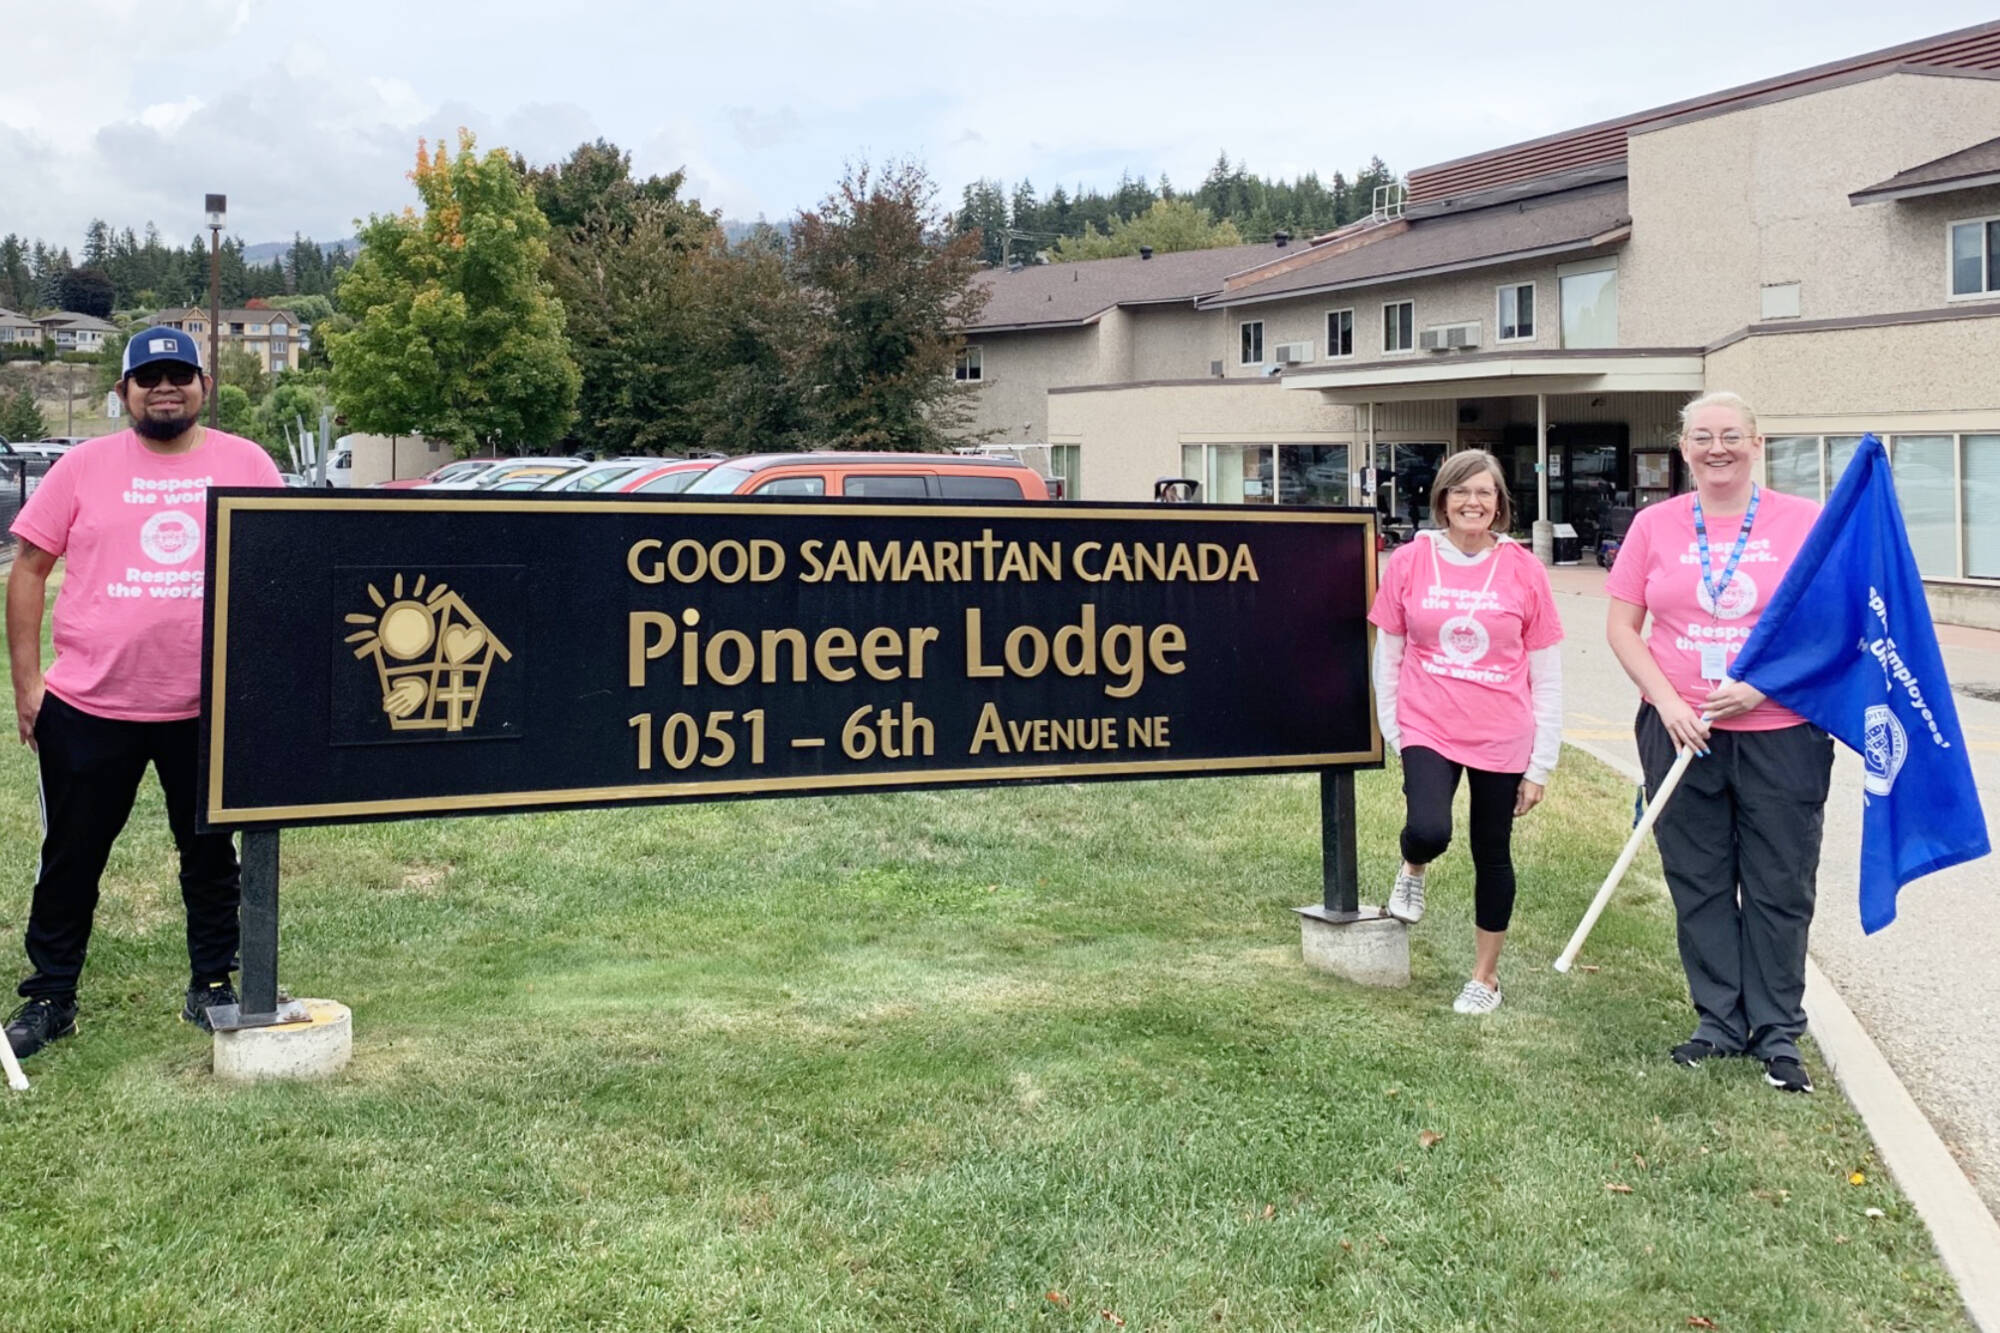 Hospital Employee’s Union members at two Good Samaritan Canada facilities in B.C., including Pioneer Lodge in Salmon Arm, will be taking part in a six-hour walkout on Friday, Oct. 20, 2023. The job action is in response to contract negotiations that the union says have been ongoing for the past two years. (Health Care Workers of Good Samaritan/Facebook photo)